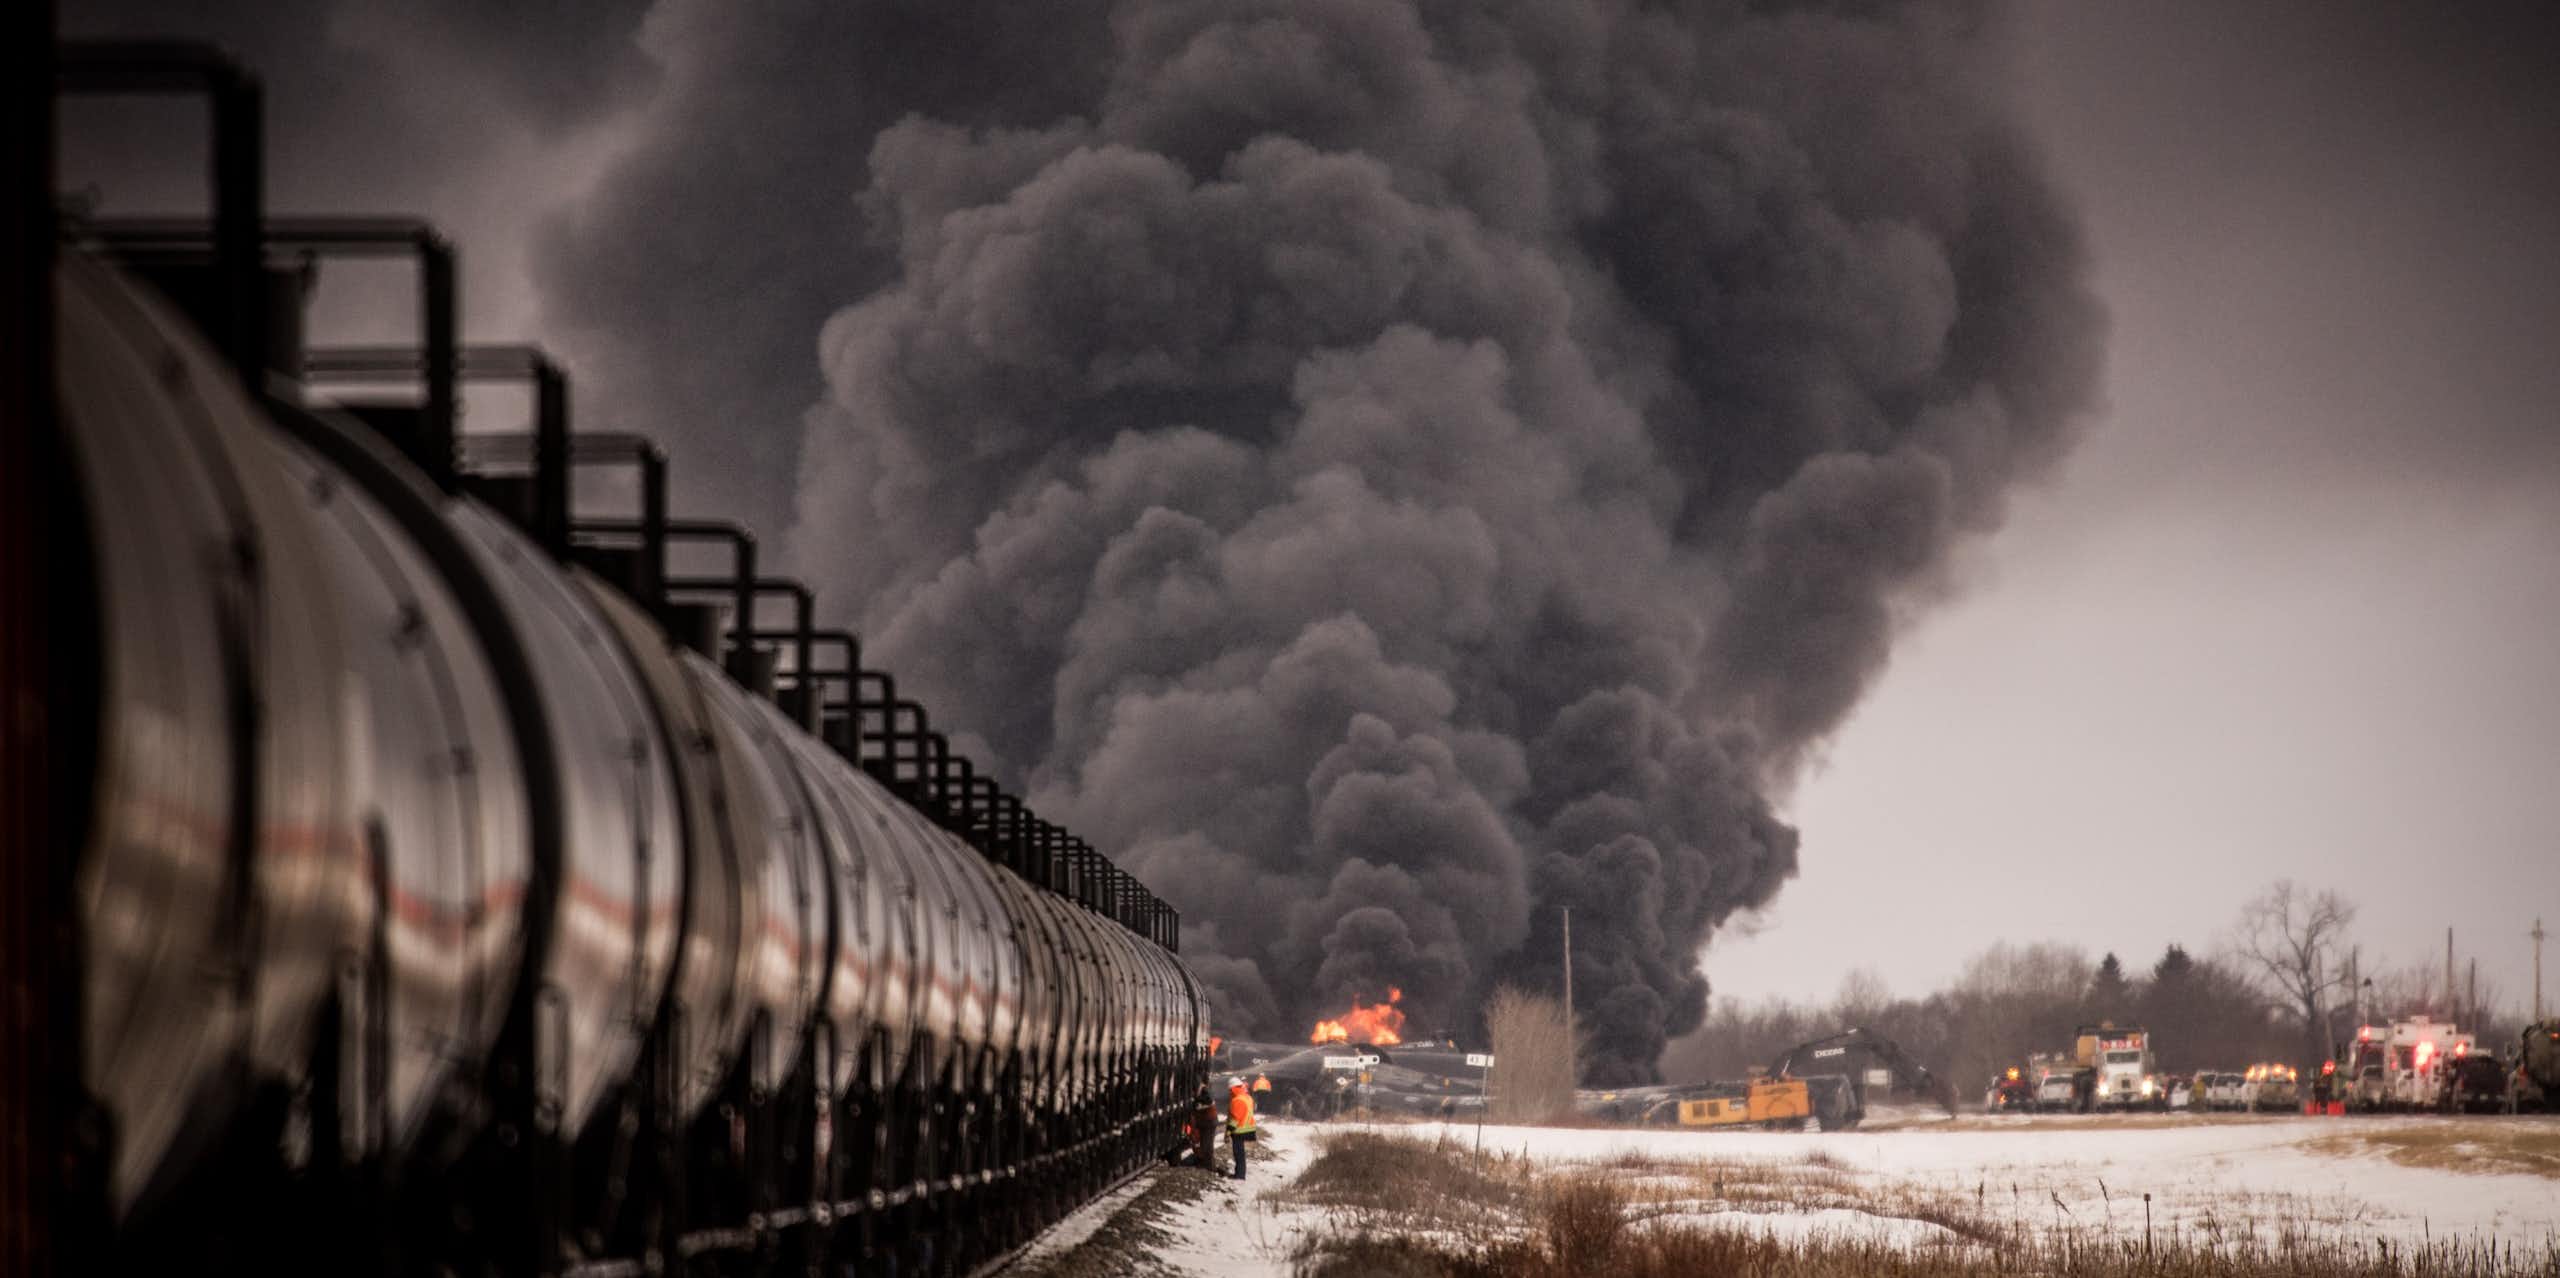 Smoke billows at the back of a black freight train.